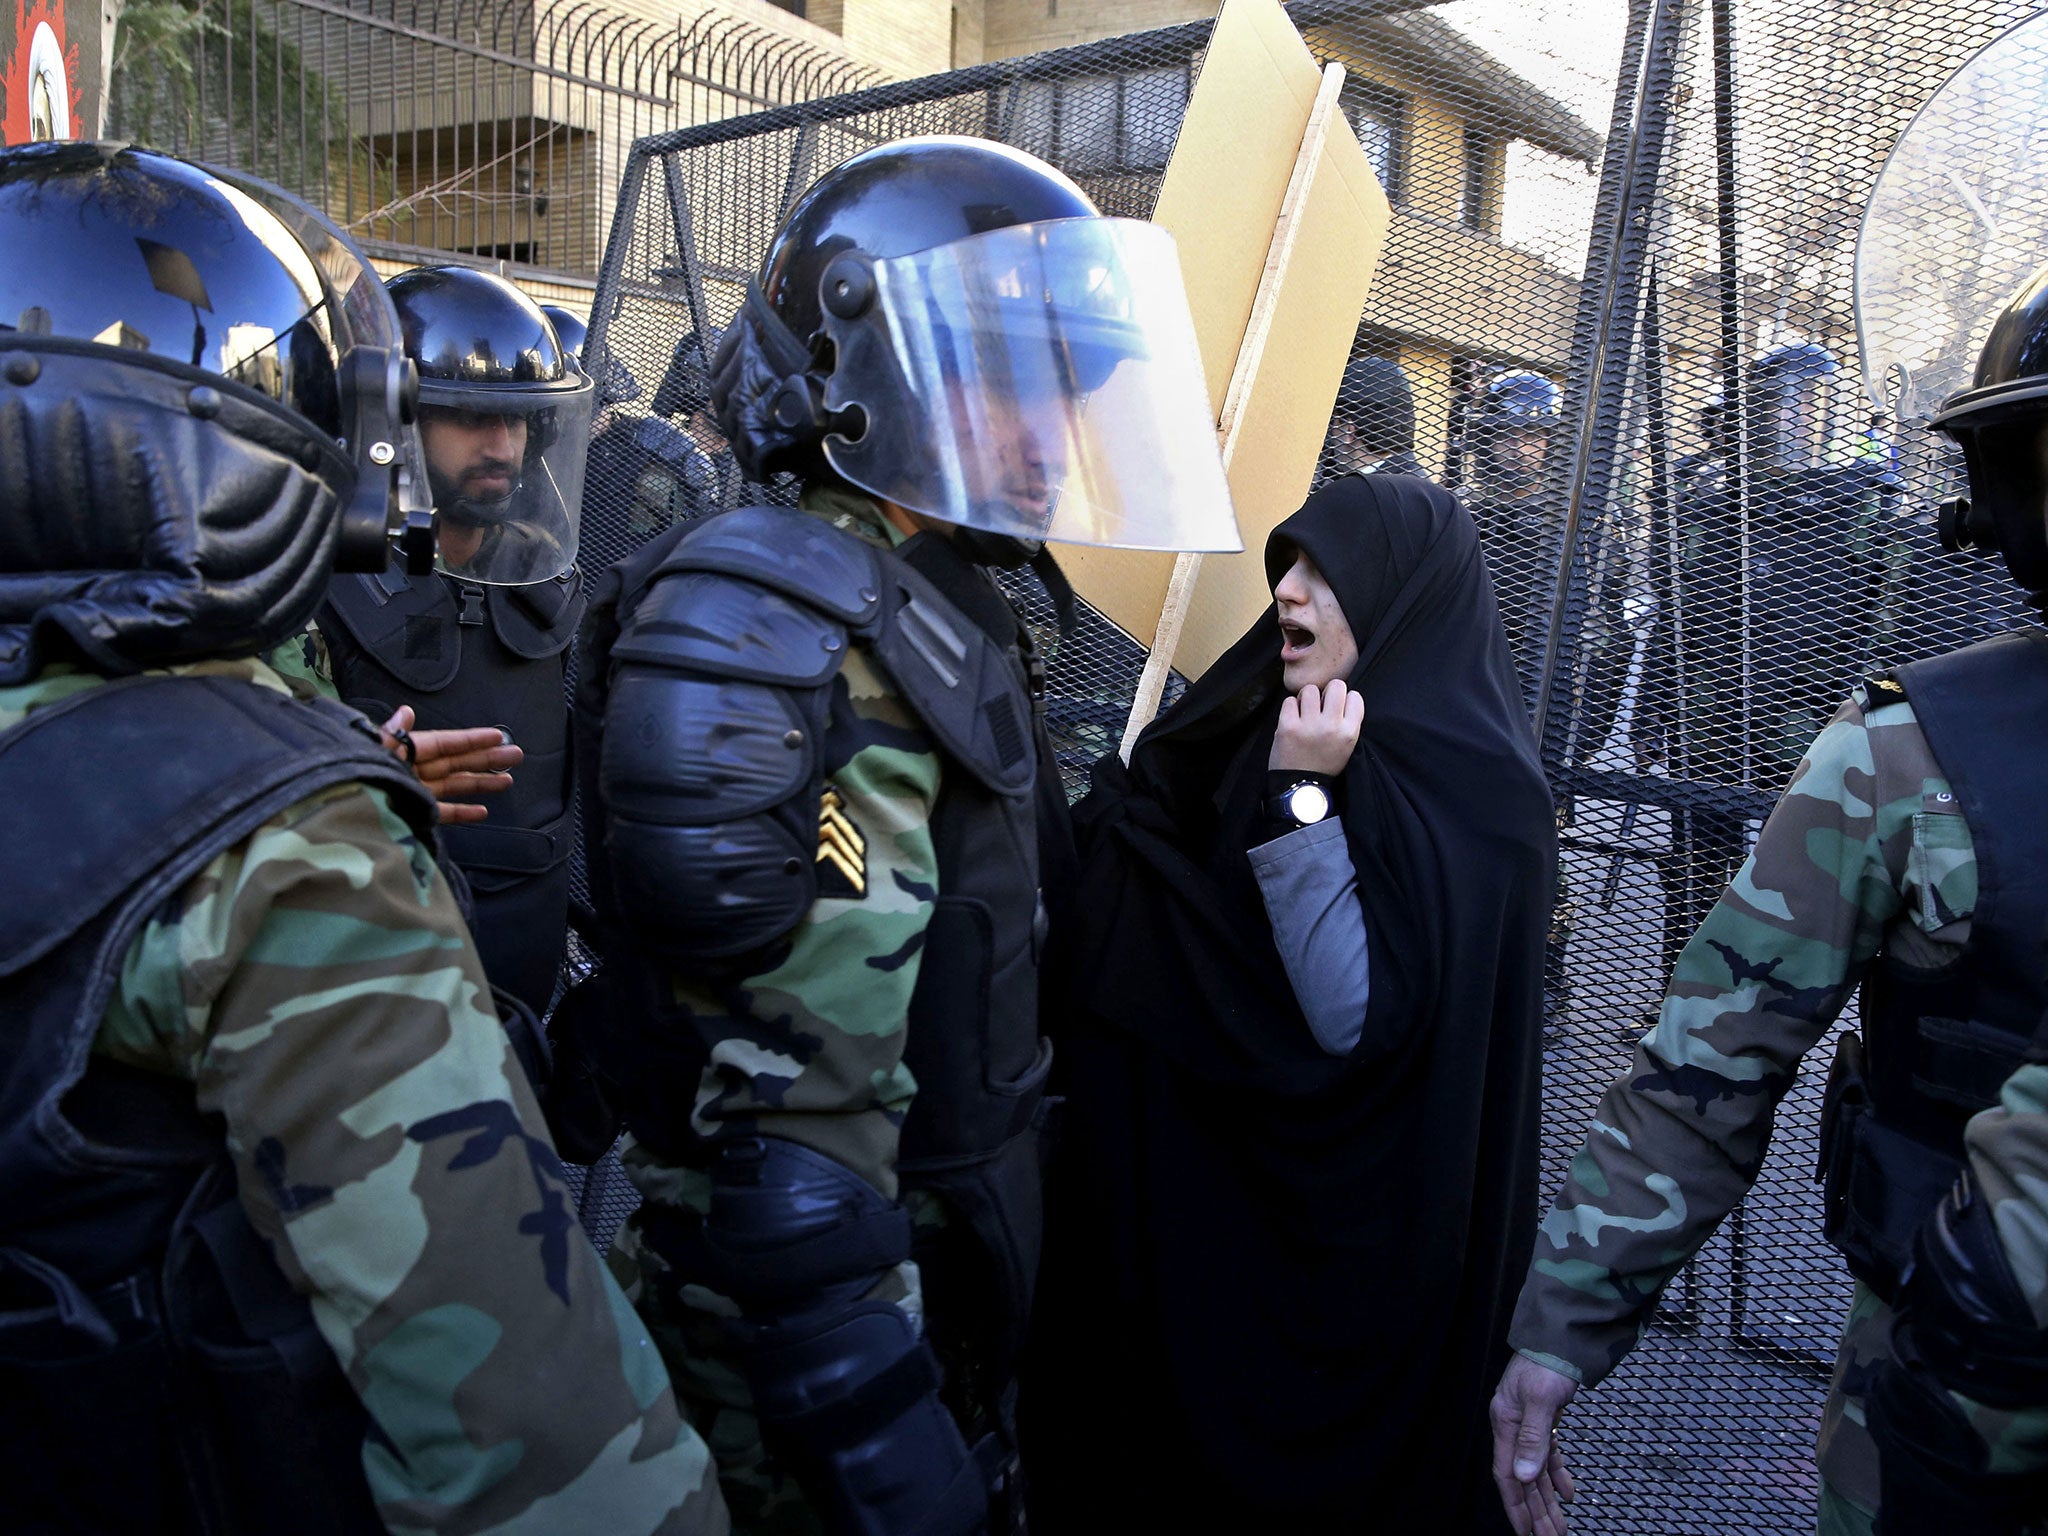 Police officers try to disperse protesters in front of the Saudi Embassy in Tehran, Iran, Sunday, Jan. 3, 2016